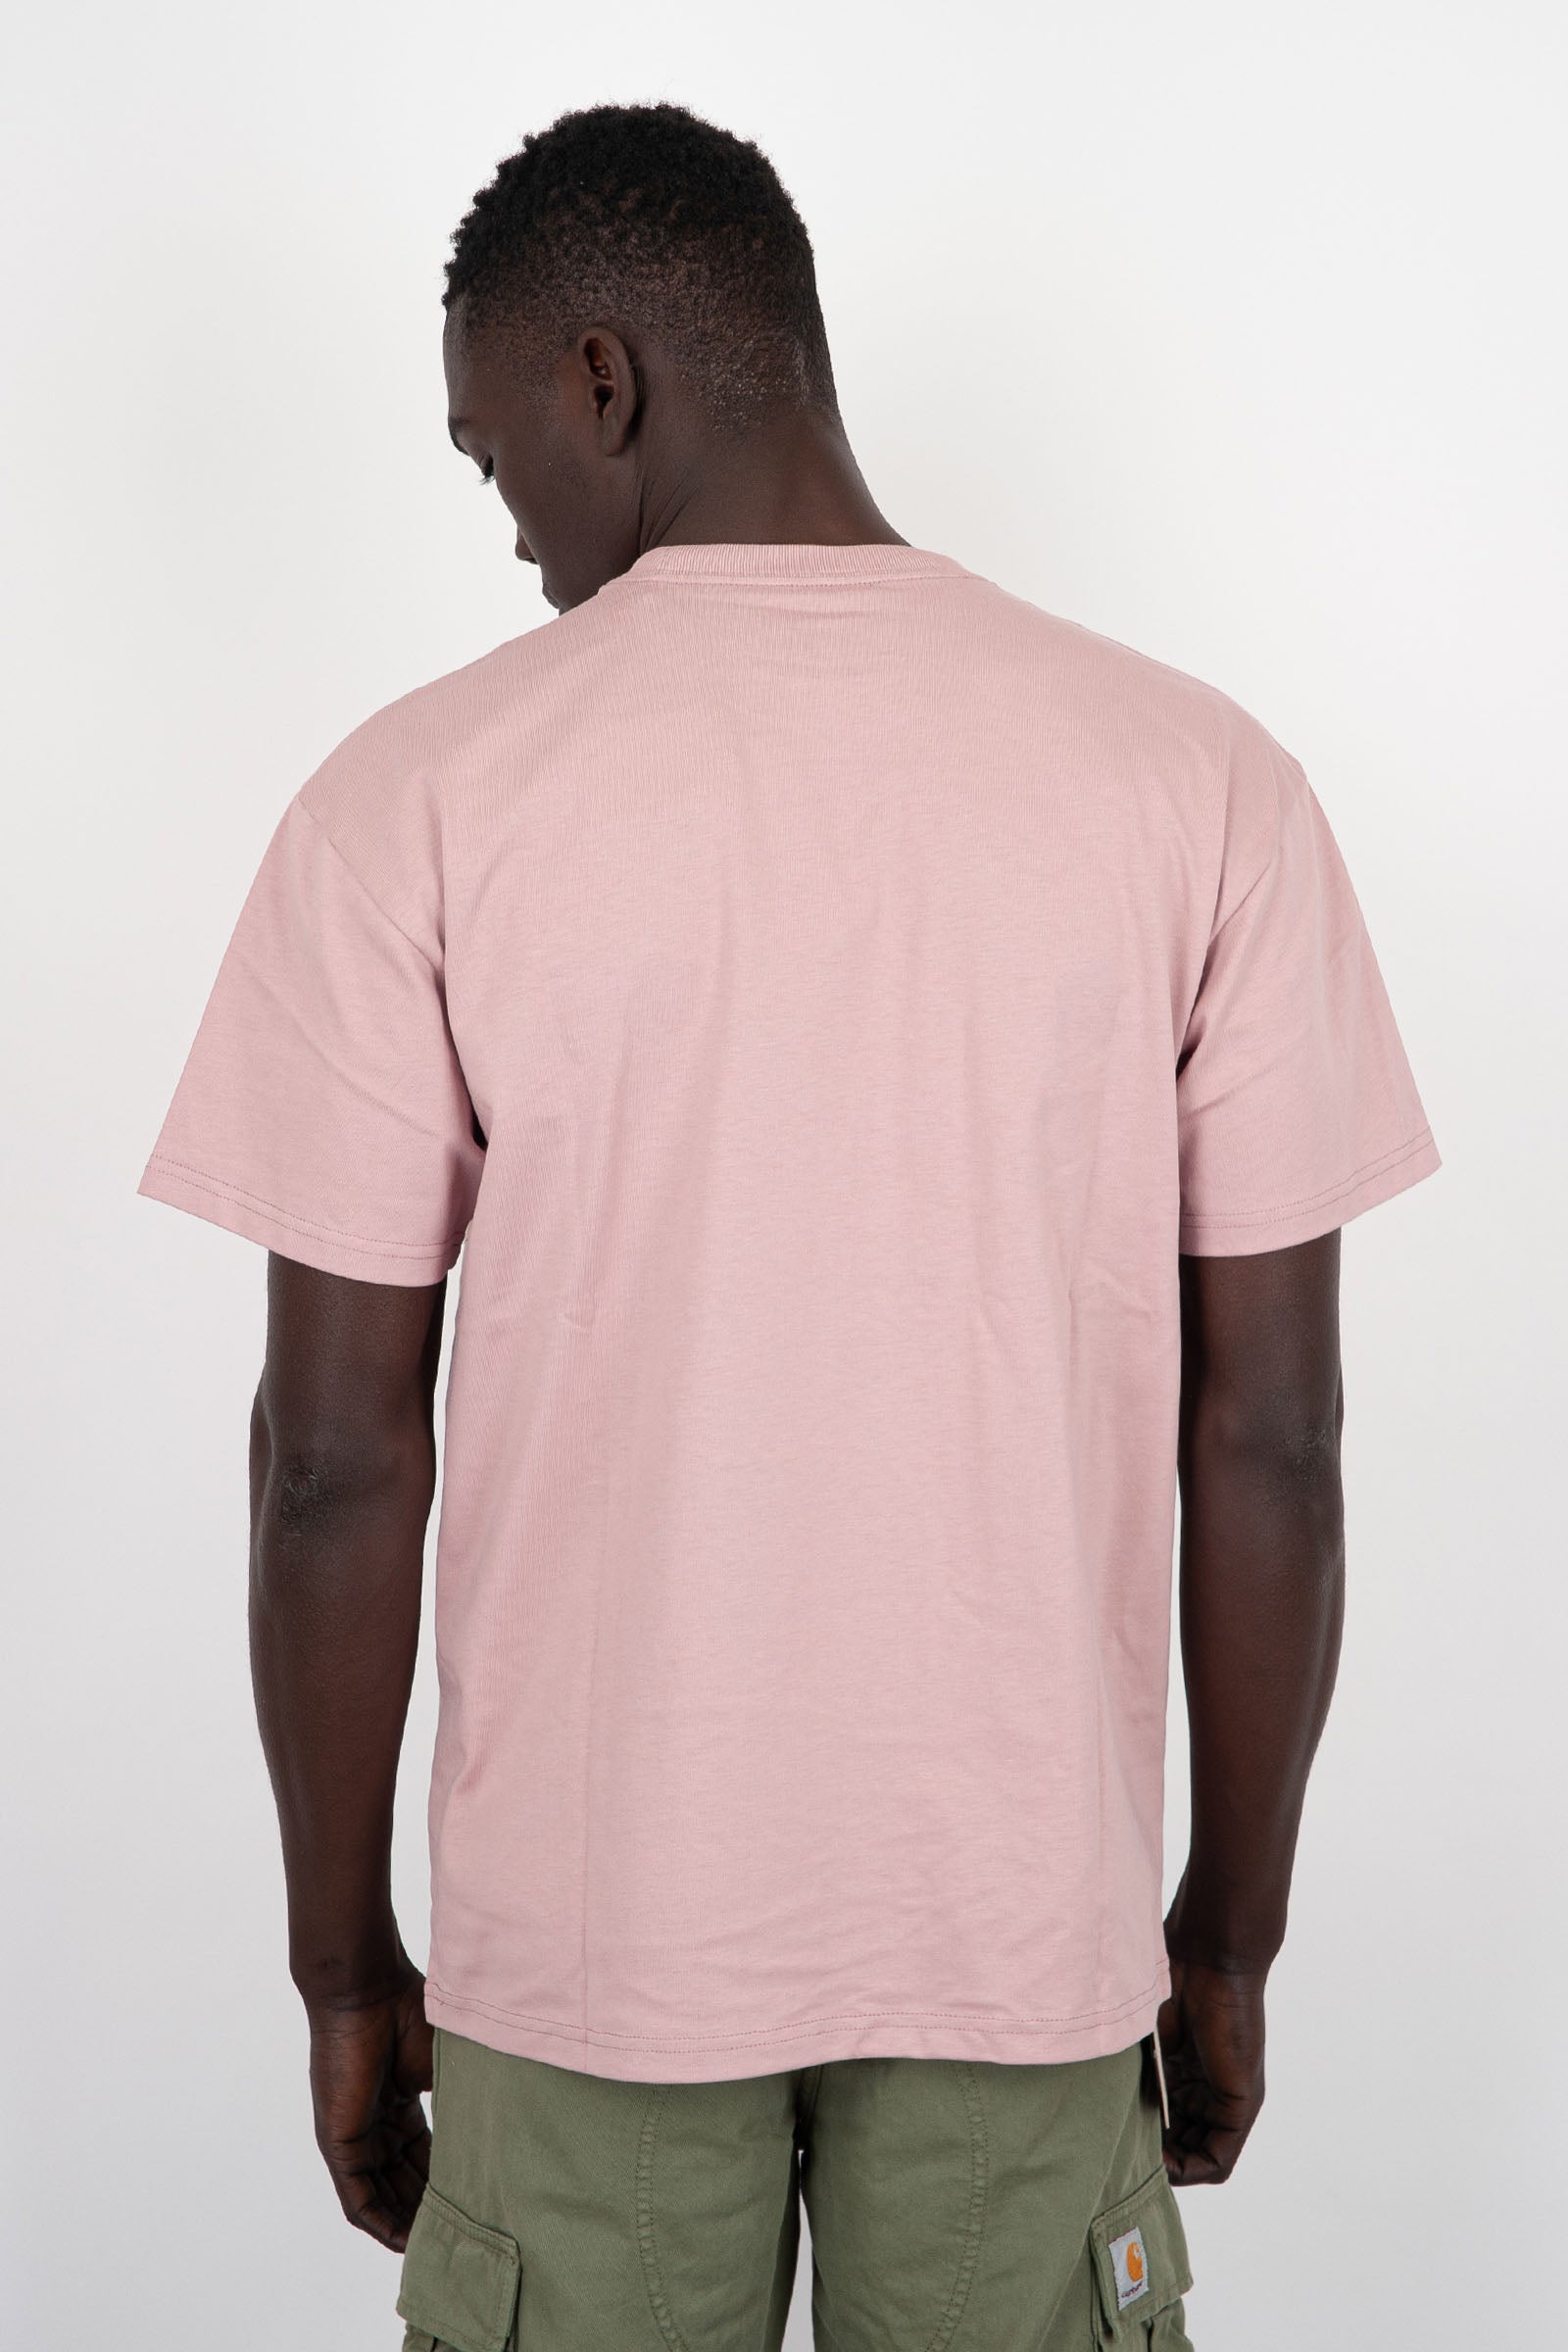 Carhartt WIP T-Shirt S/S Chase Cotone Rosa - 4